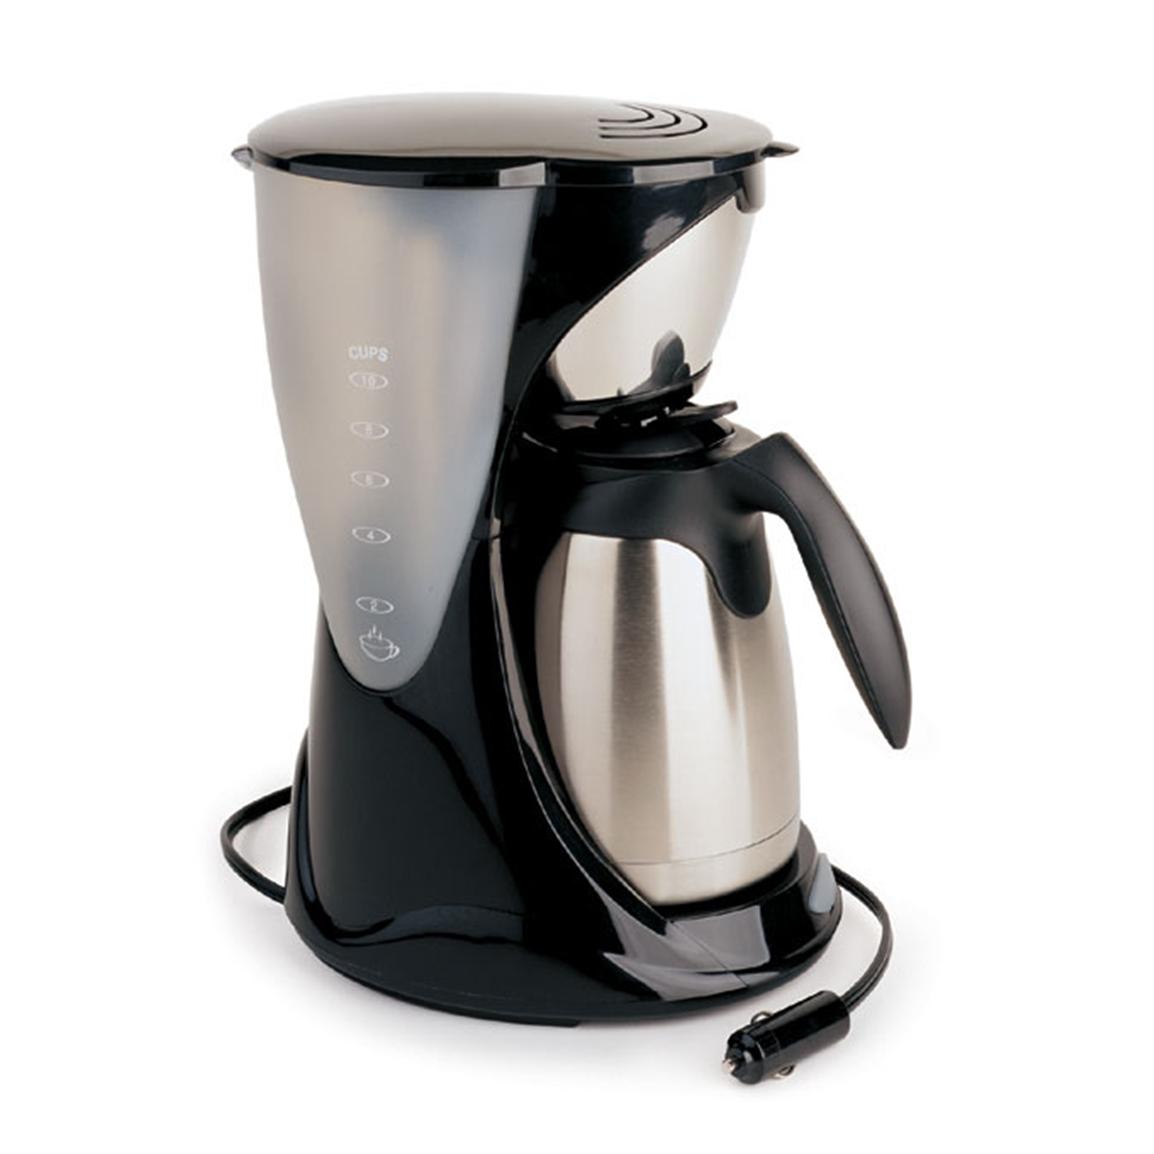 RoadPro® Marine 12 Volt Stainless Steel 10 Cup Coffee Maker 88775